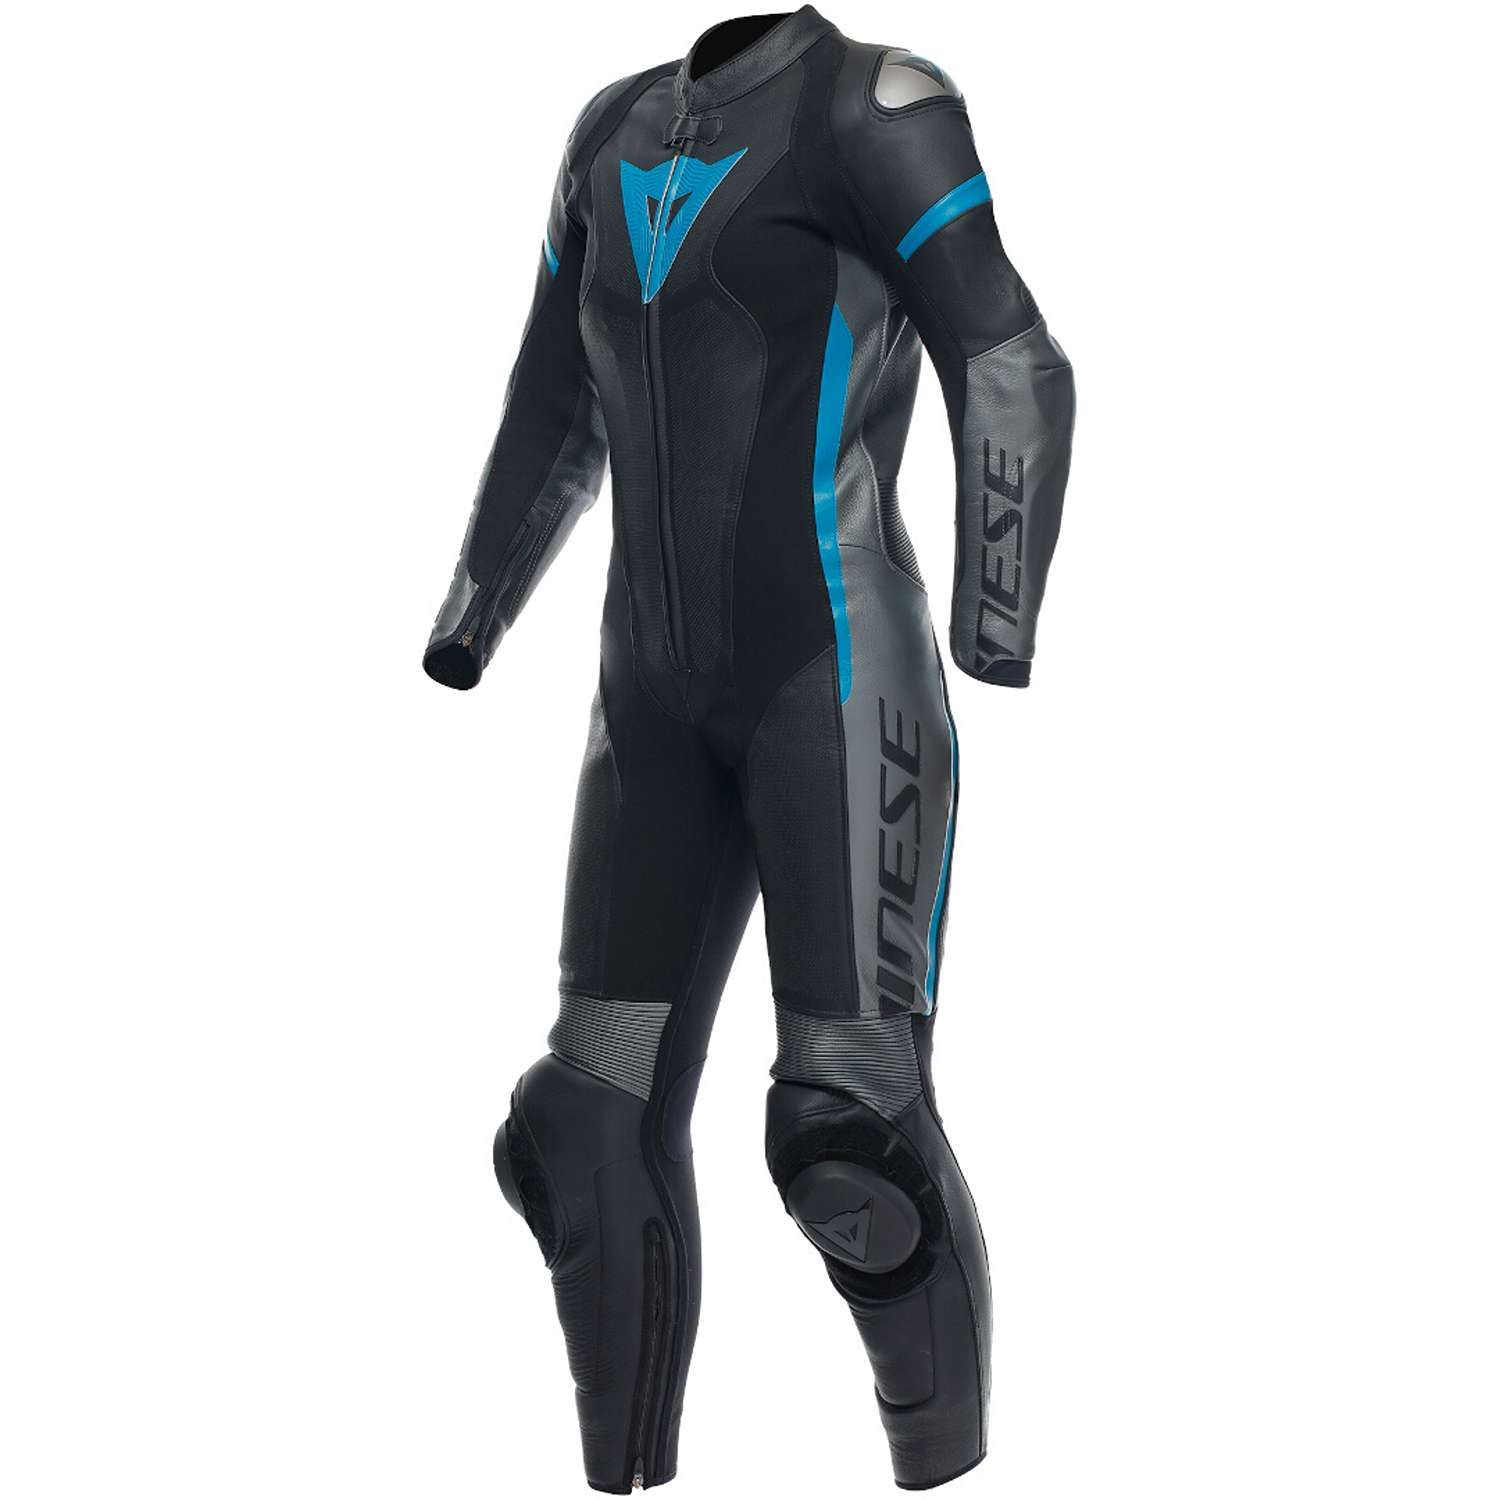 Image of EU Dainese Grobnik Lady Leather 1Pc Suit Perf Black Anthracite Teal Taille 42